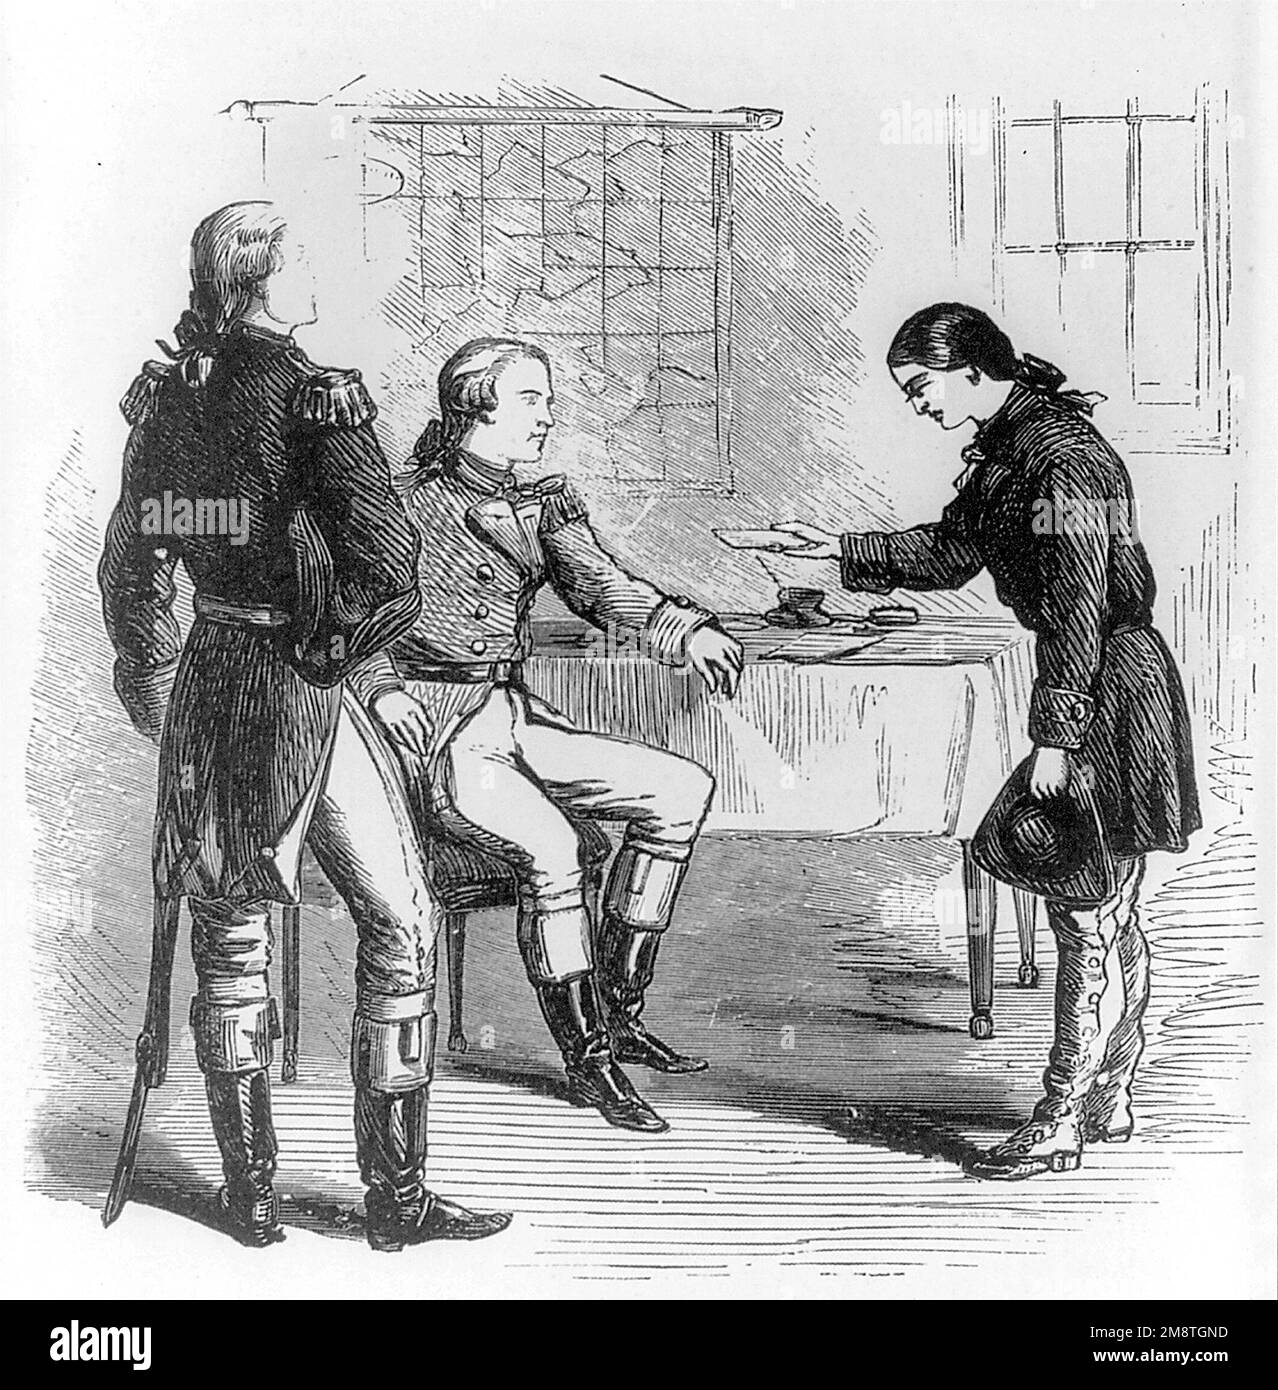 Deborah Sampson. Illustratioin entitled Deborah Sampson Presents a Letter to General Washington, engraving. Deborah Sampson Gannett (1760-1827) was a woman who disguised herself as a man, Robert Shirtliff, in order to join the Continental Army. Stock Photo